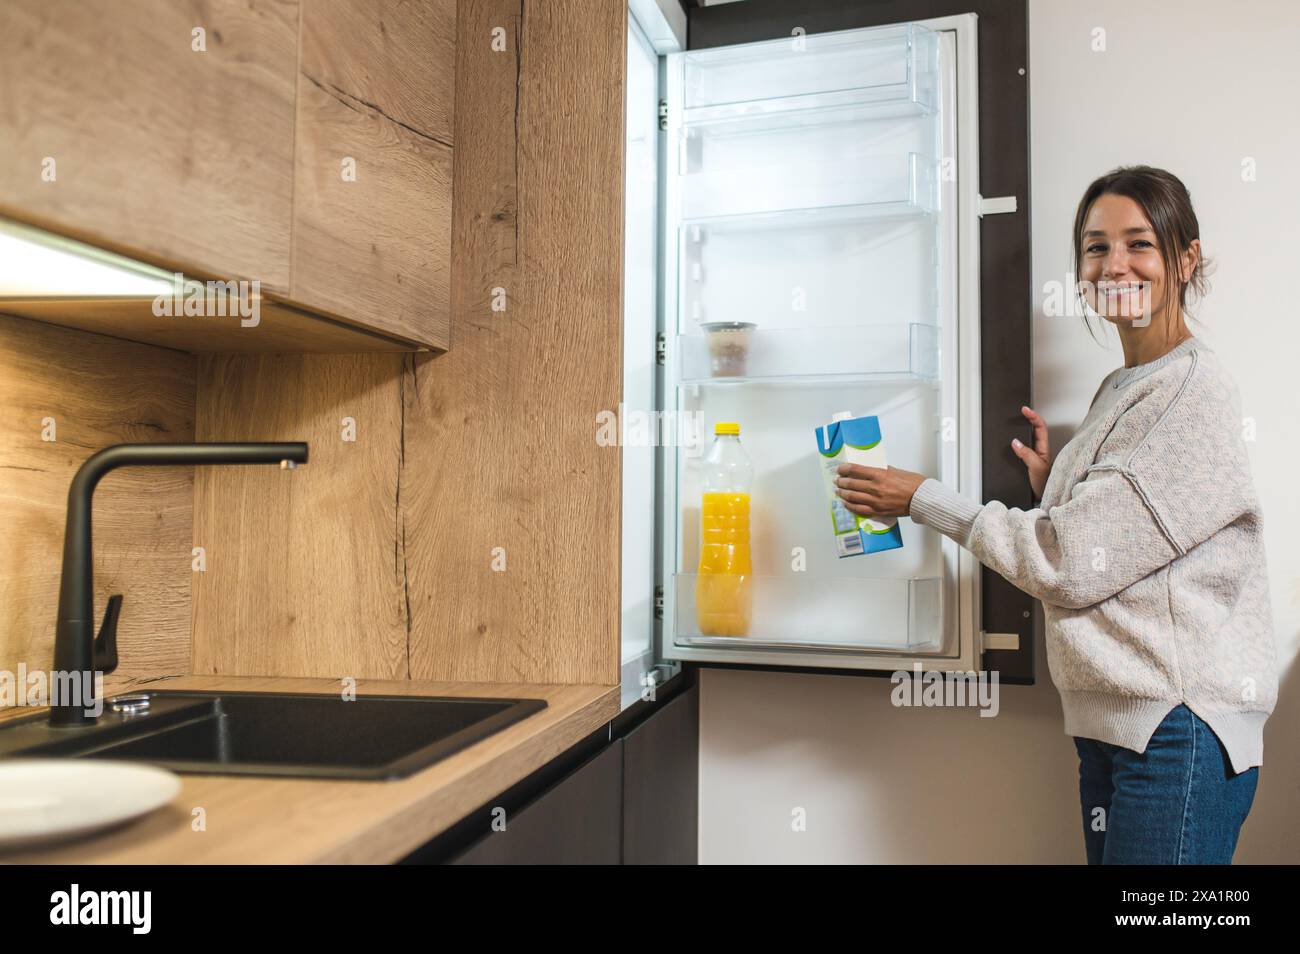 Woman in the kitchen. Young dark-haired woman opening fridge and taking a bottle of milk Stock Photo